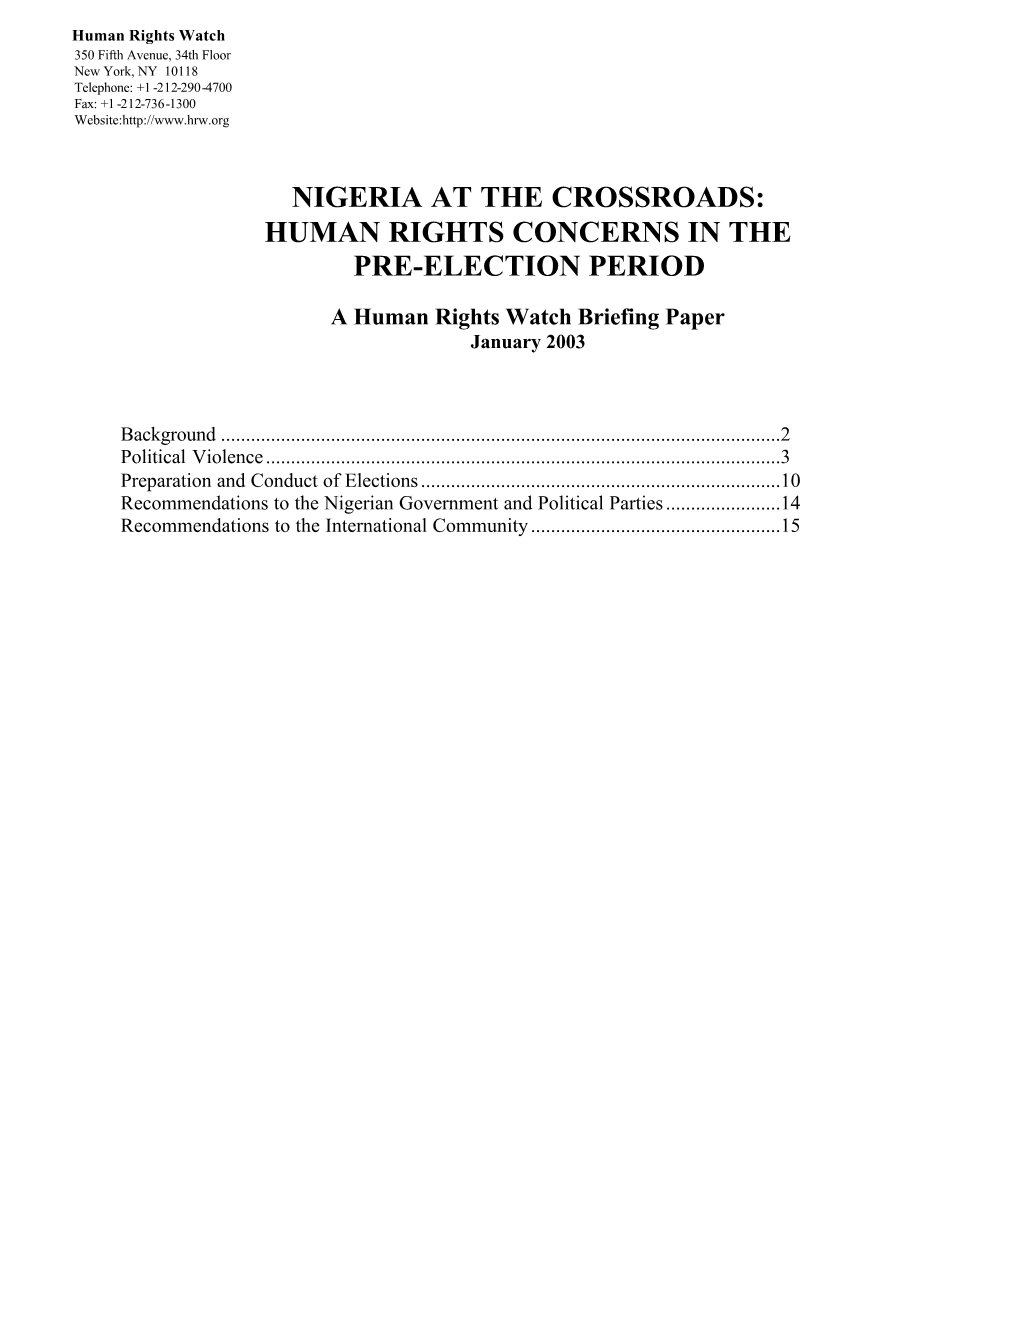 Nigeria at the Crossroads: Human Rights Concerns in the Pre-Election Period